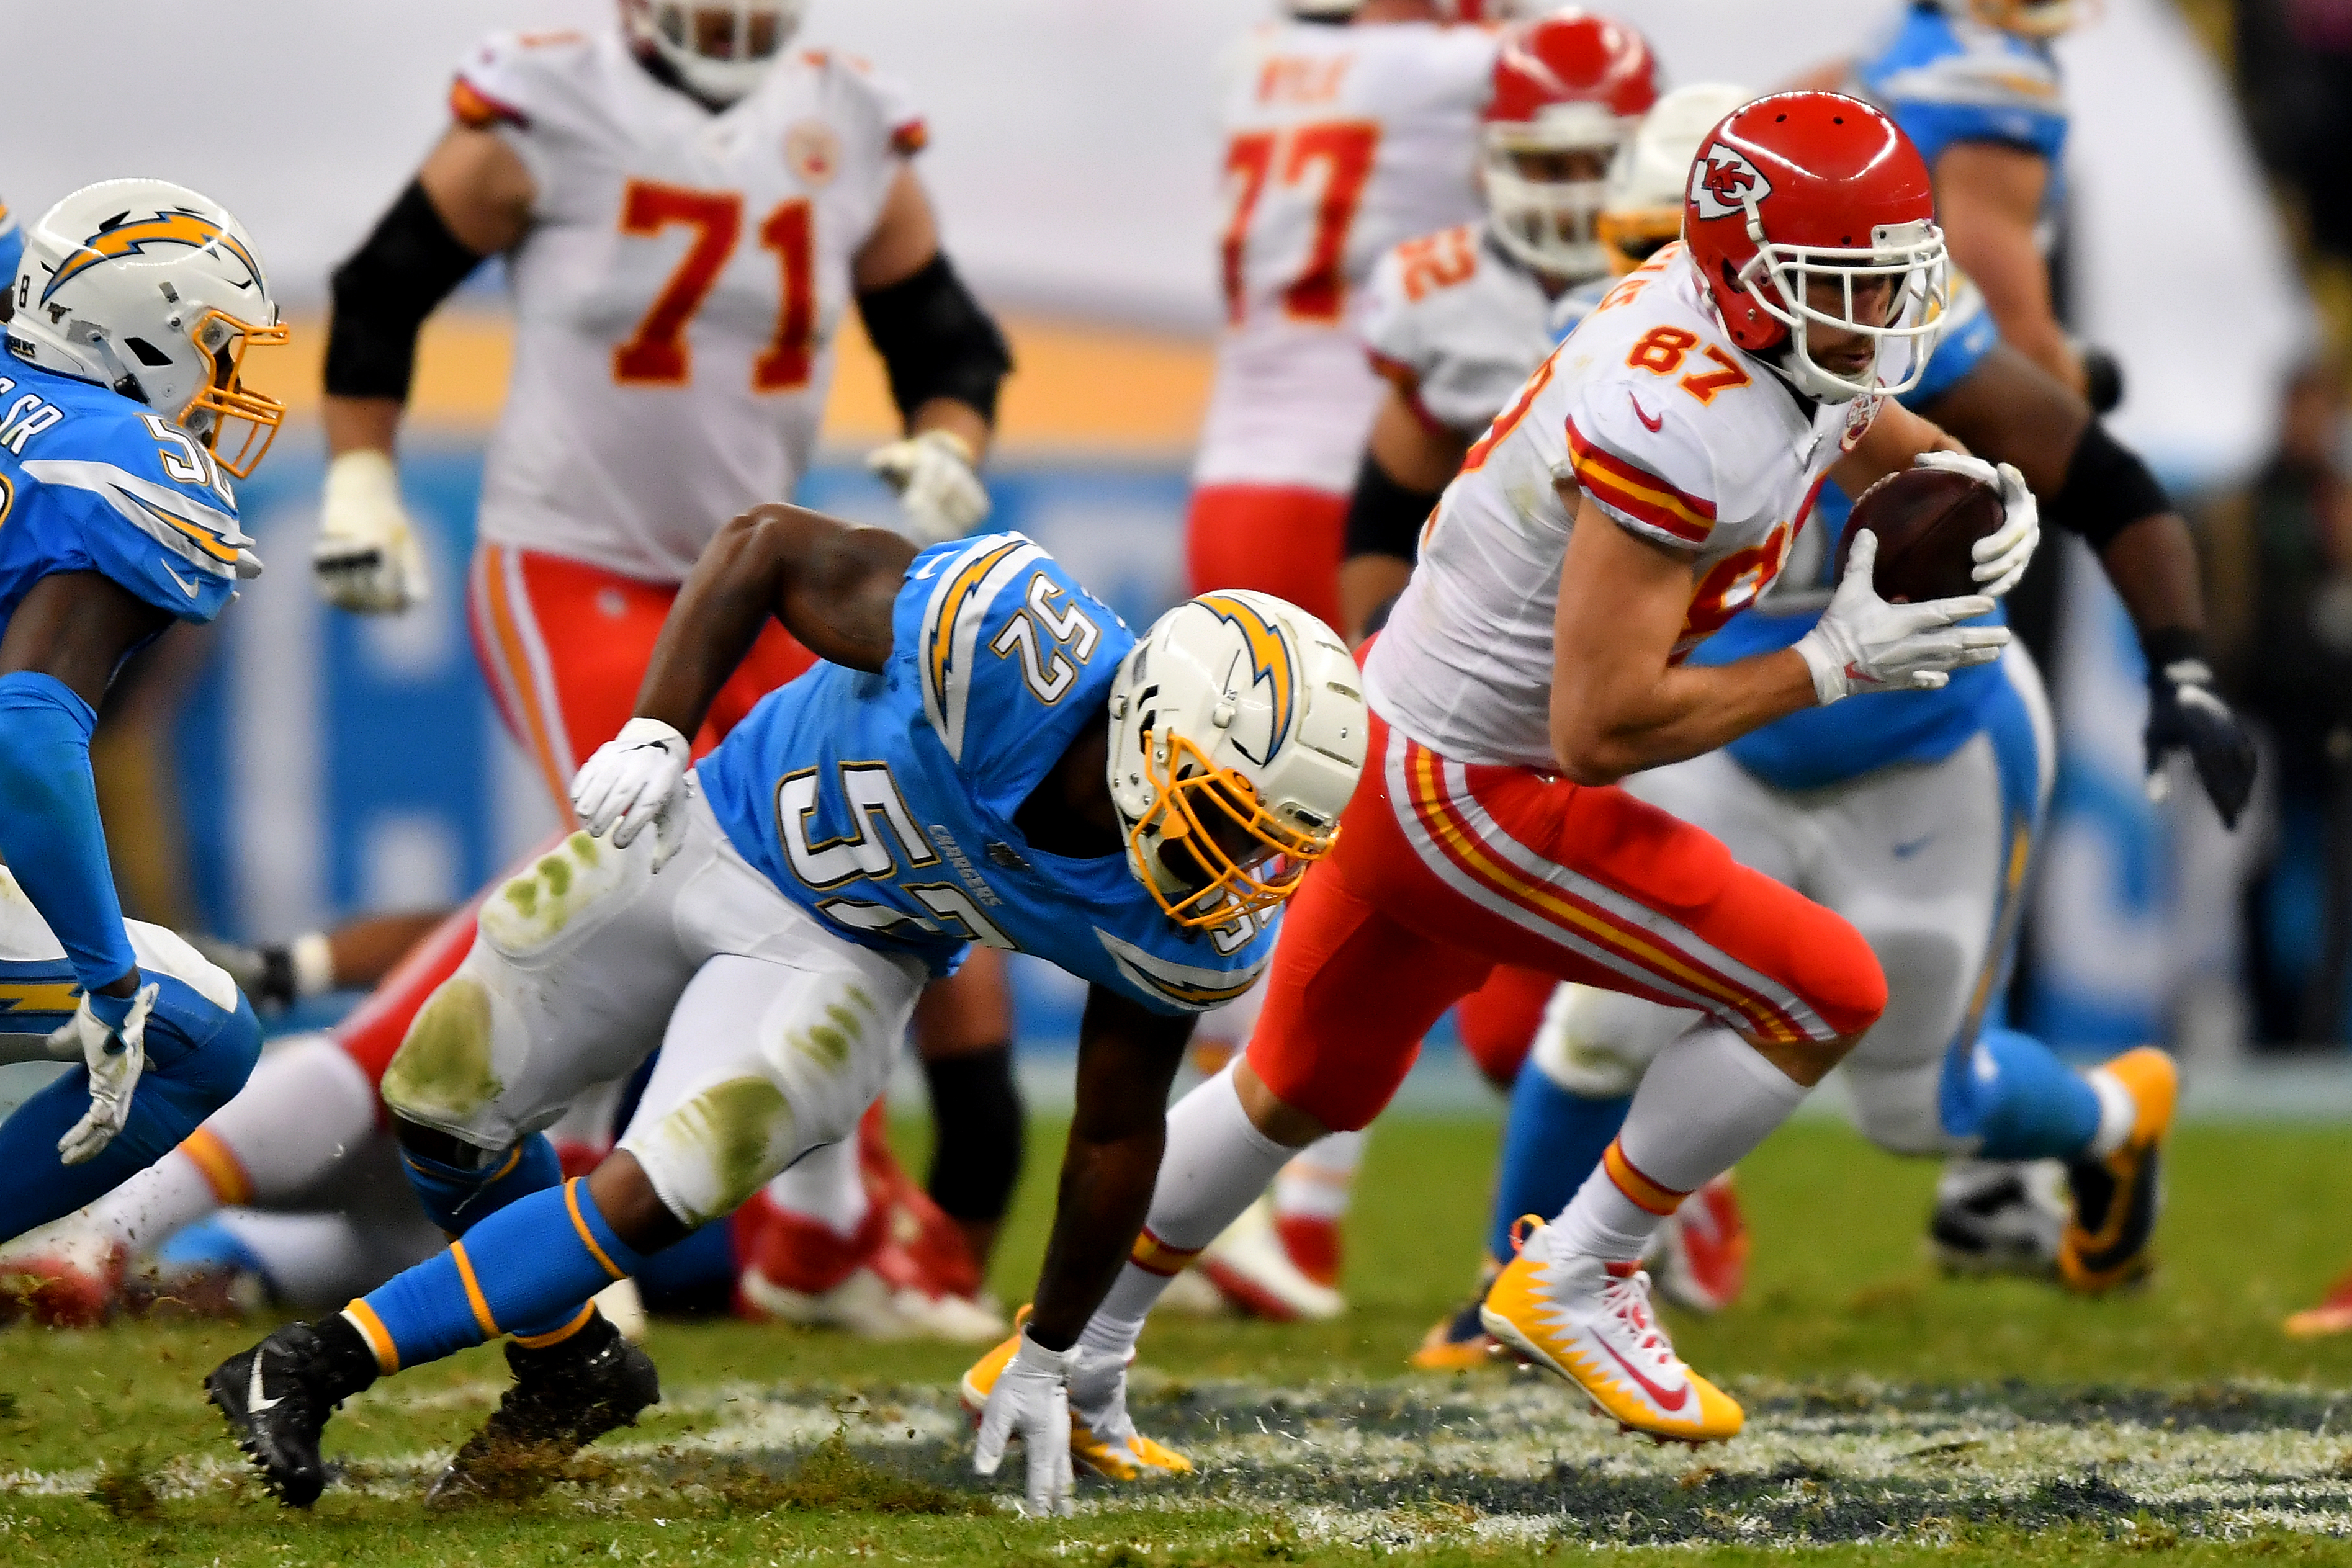 NFL expert picks 2020, Week 2: Chiefs are the easy pick of the weekend 